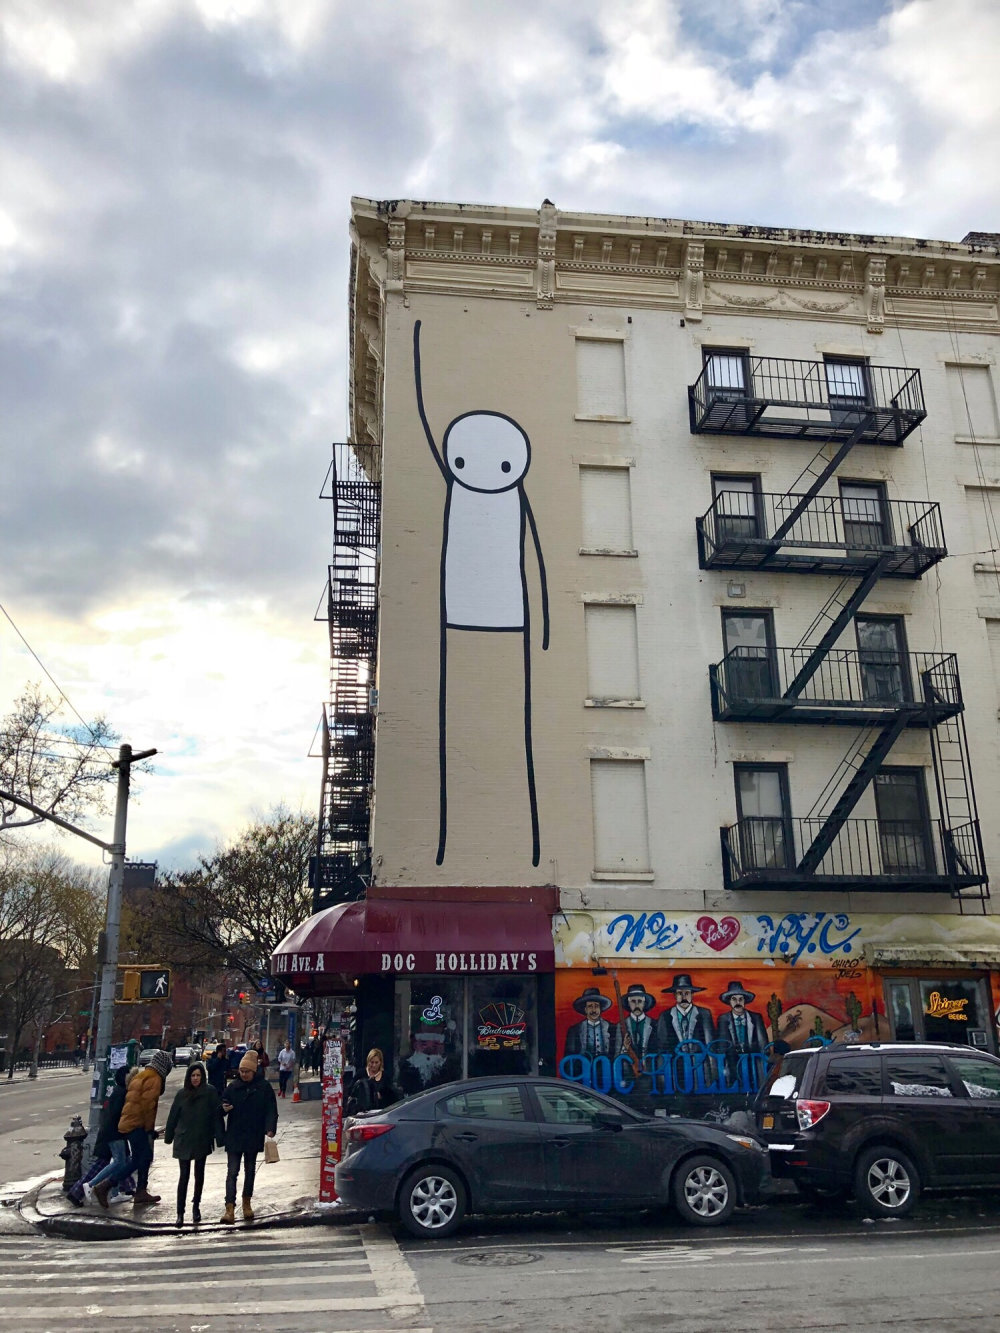 mural in New York by artist Stik.